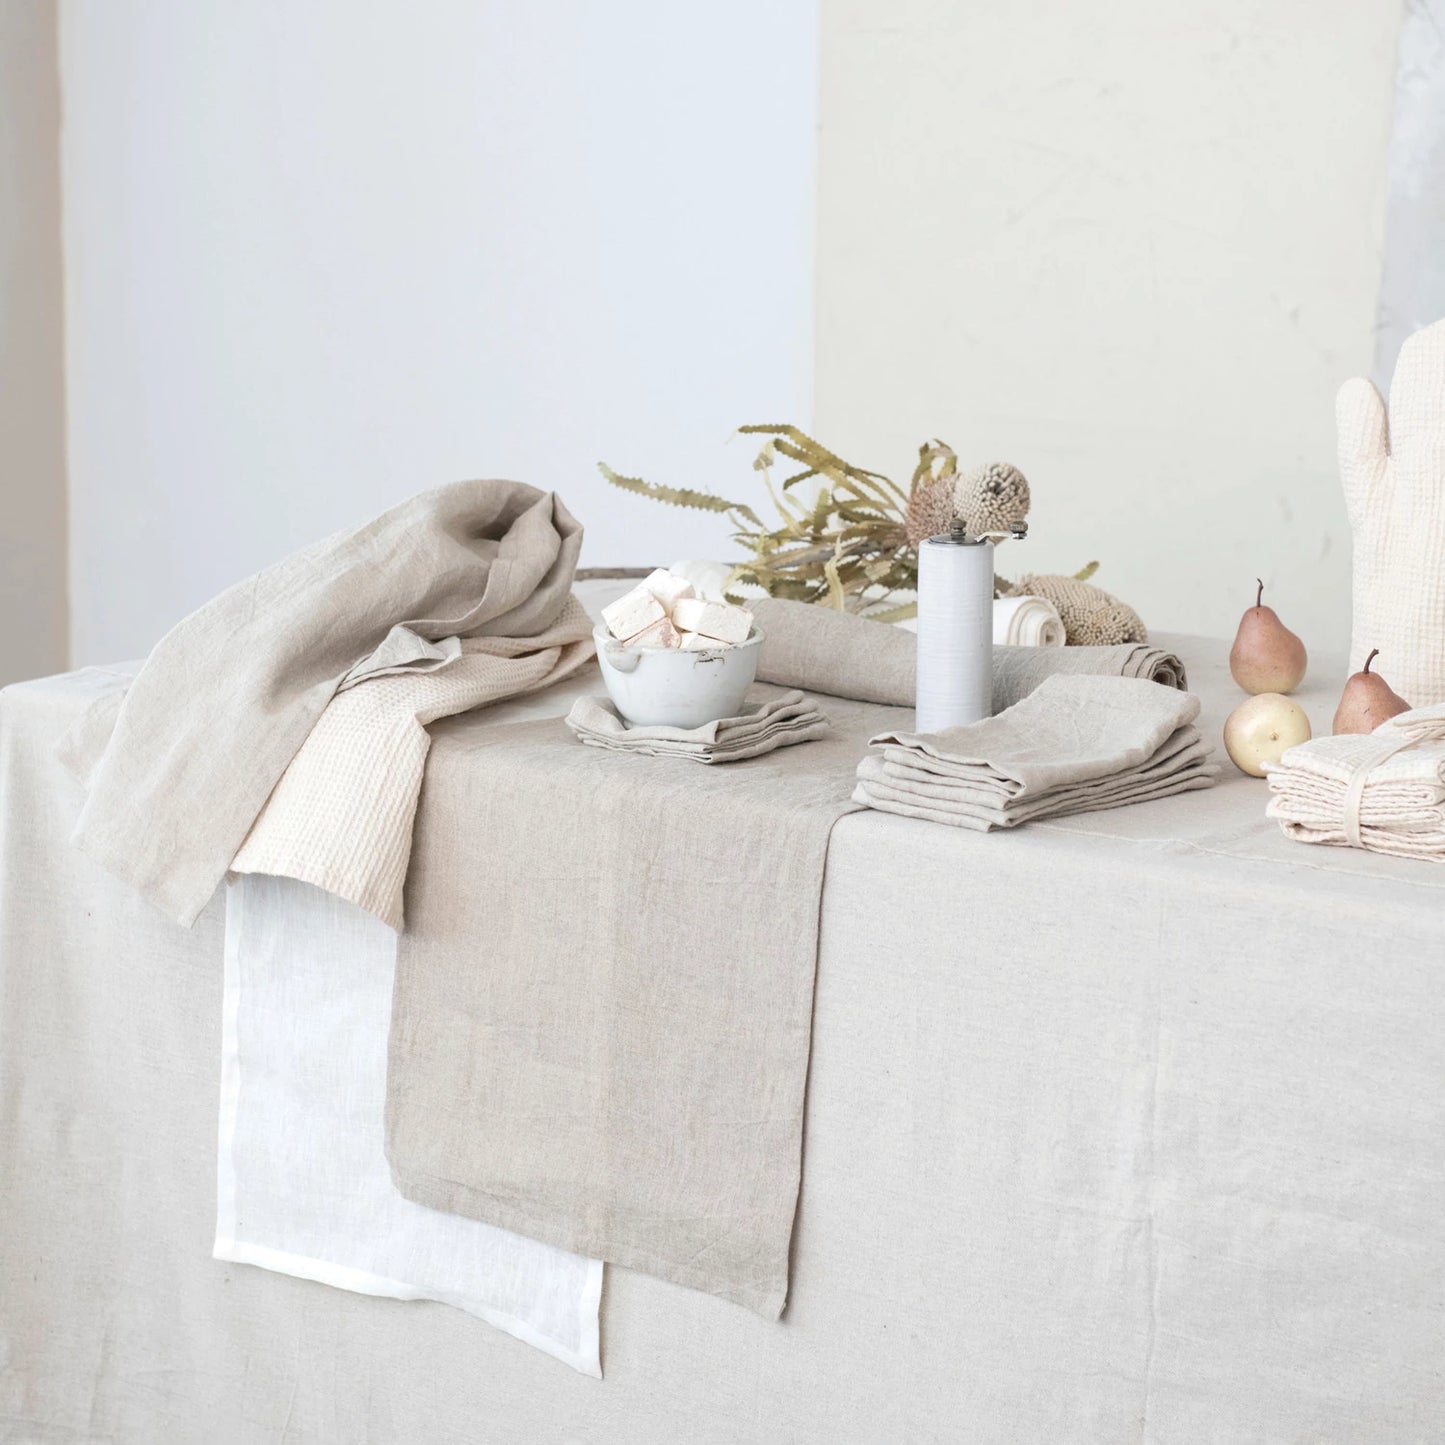 Stonewashed Table Runner, The Feathered Farmhouse